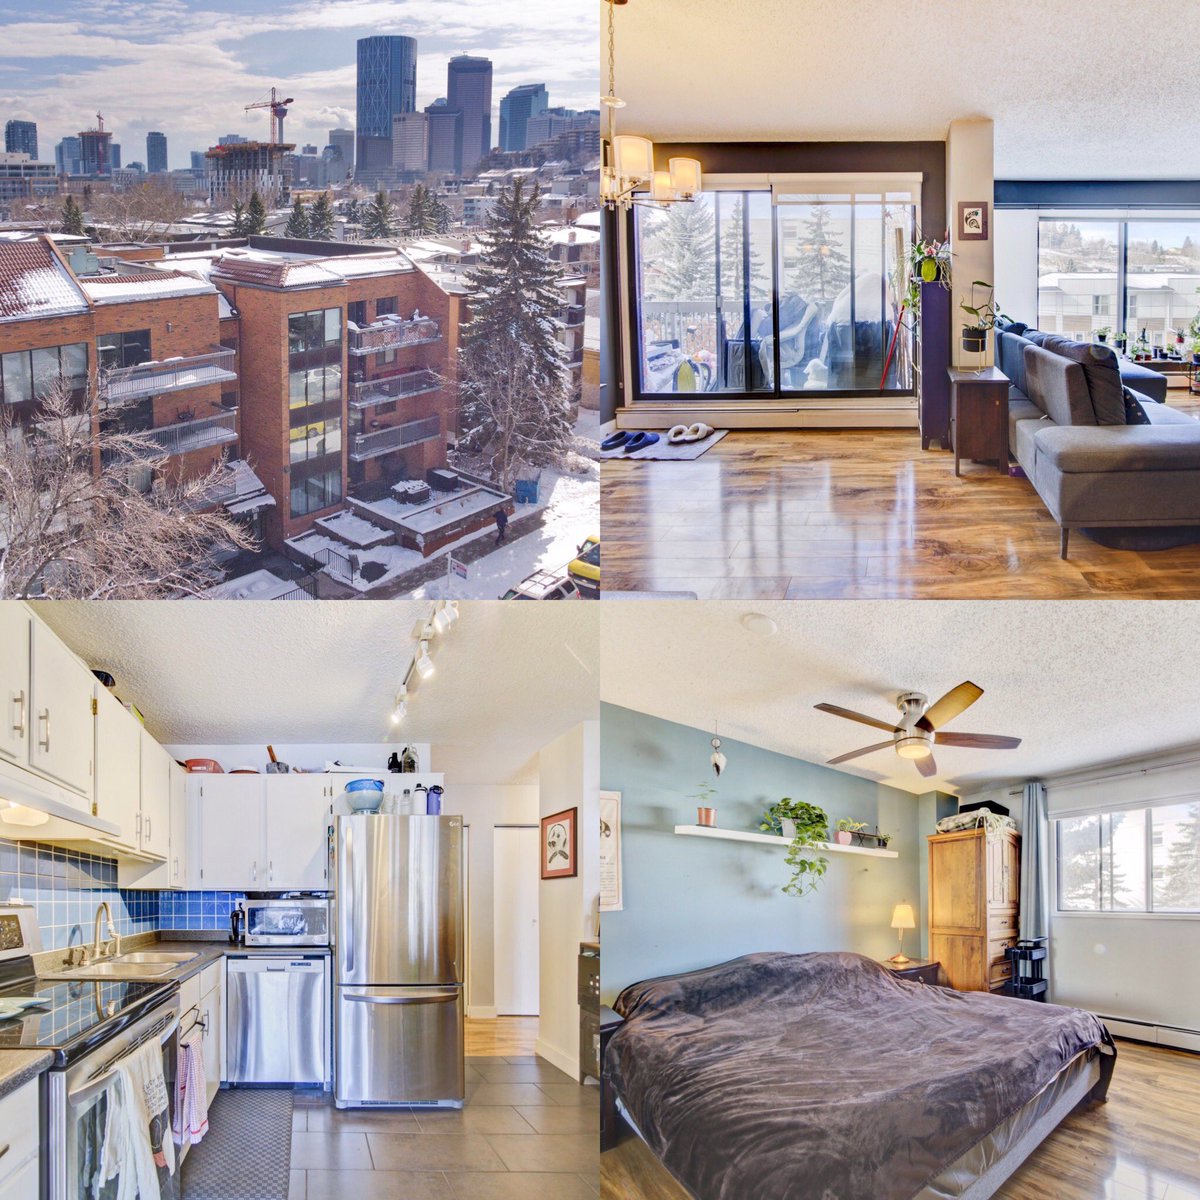 JUST LISTED! #401, 659 - 4 Ave NE, a 2 bedroom corner penthouse unit in a well-run concrete building in Bridgeland. COLDWELL BANKER MOUNTAIN CENTRAL #justlisted #forsale #bridgelandyyc #patrickmurrayrealtor #innercity #penthouse #cornerunit